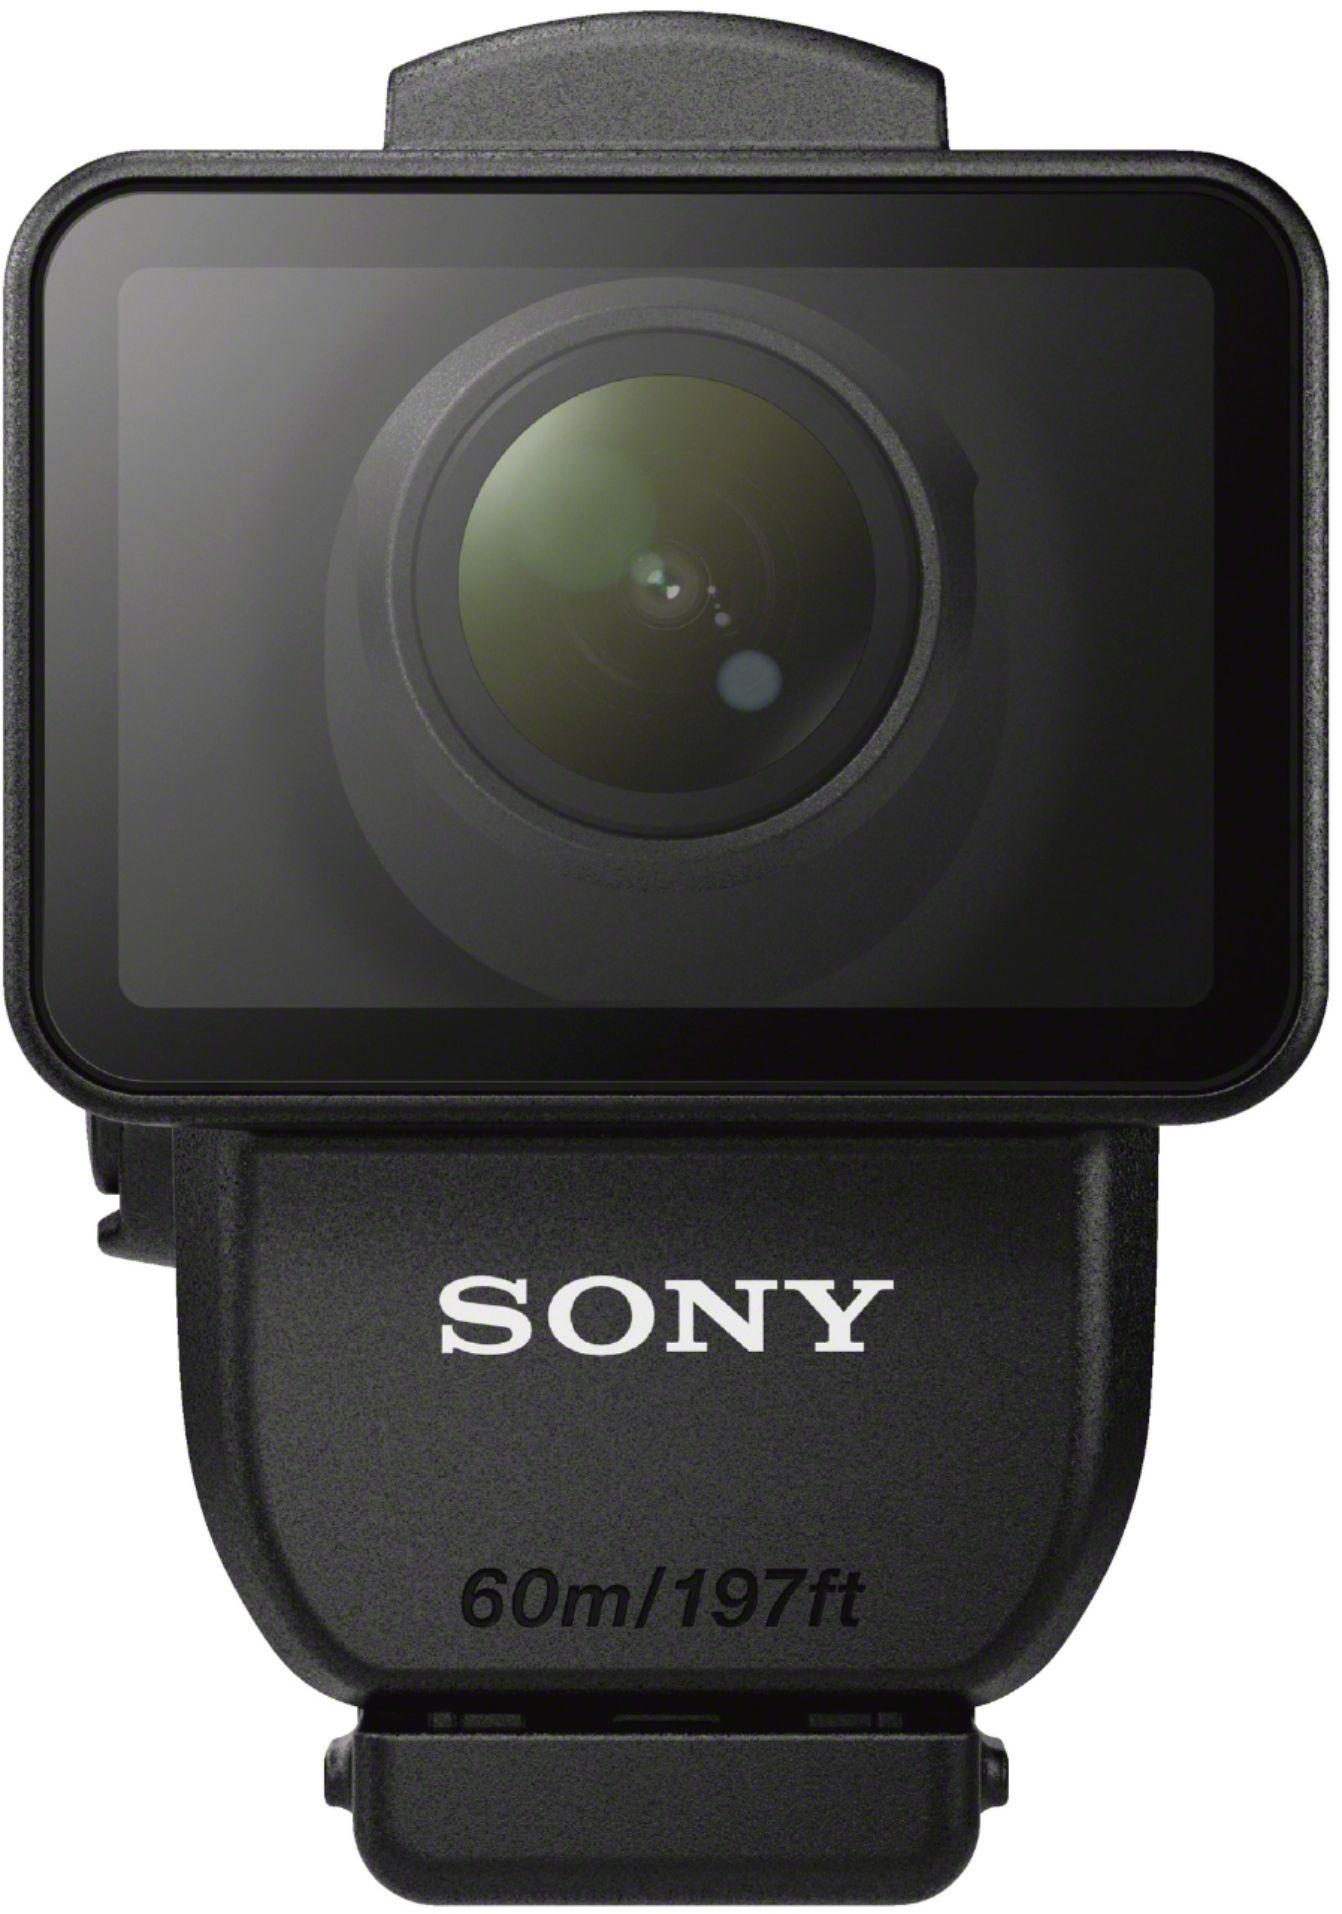 Full HD 1080p Sports Action Camera, HDR-AS50